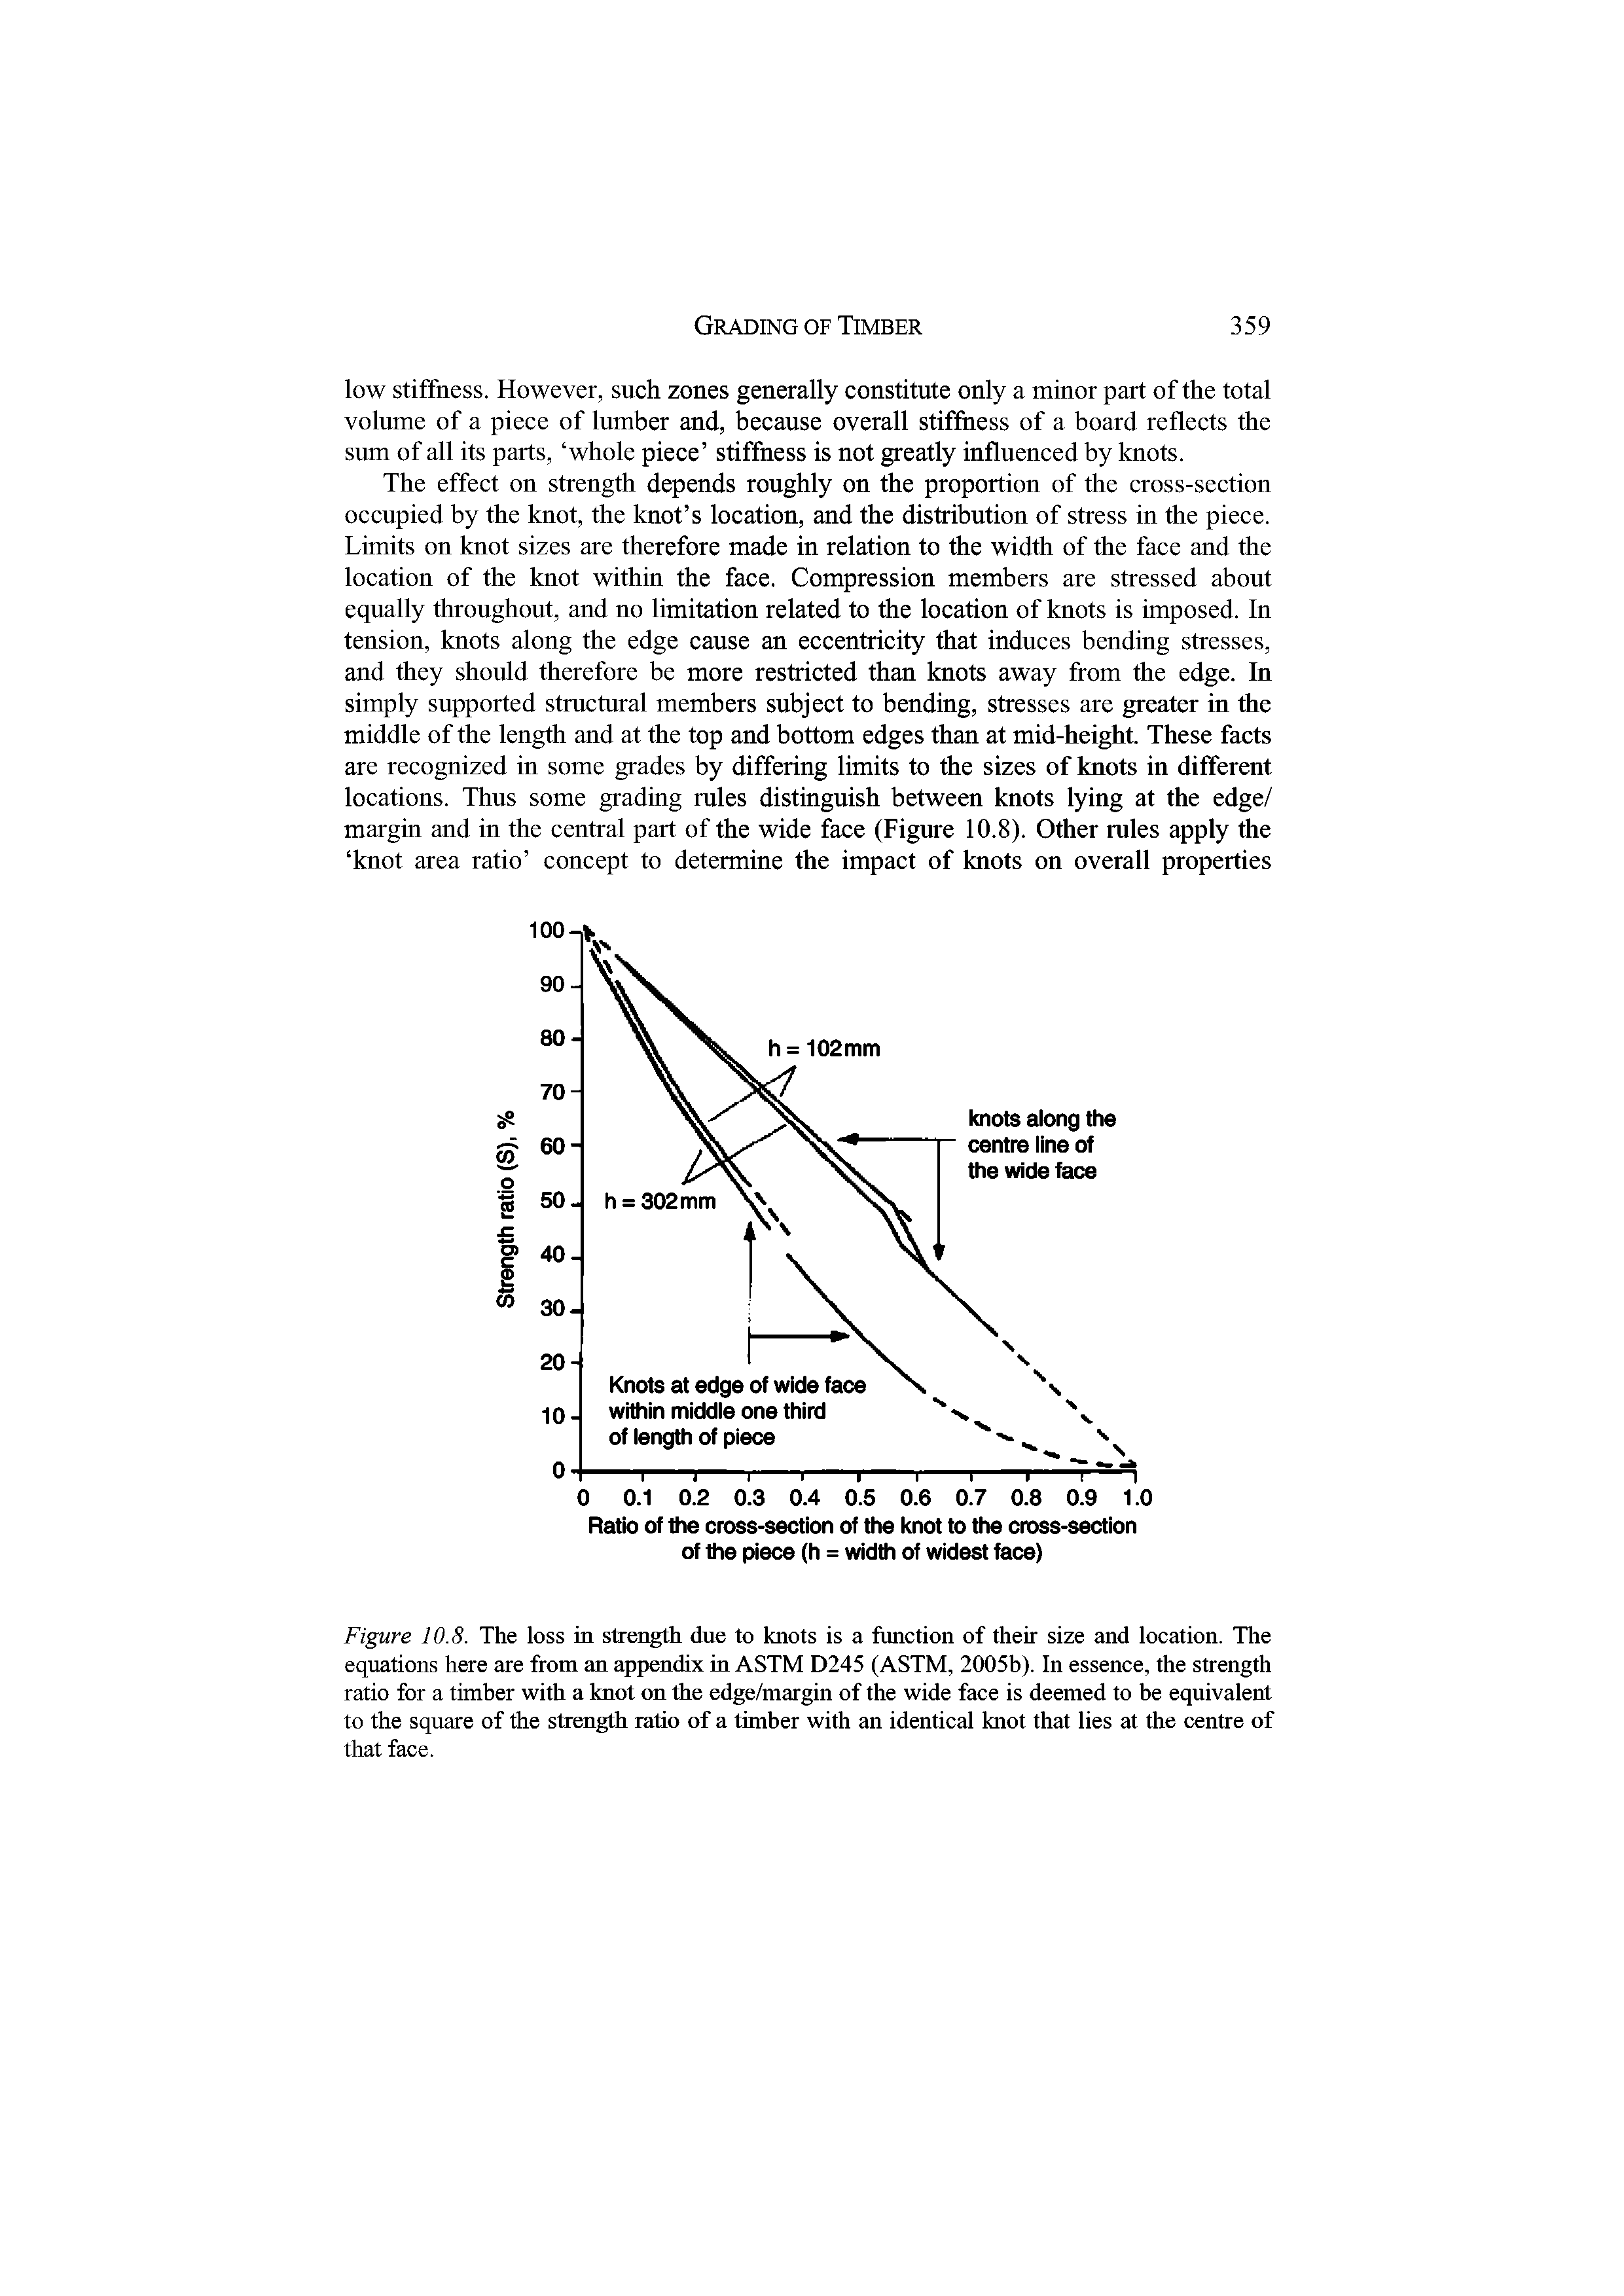 Figure 10.8. The loss in strength due to knots is a function of their size and location. The equations here are from an appendix in ASTM D245 (ASTM, 2005b). In essence, the strength ratio for a timber with a knot on the edge/margin of the wide face is deemed to be equivalent to the square of the strength ratio of a timber with an identical knot that lies at the centre of that face.